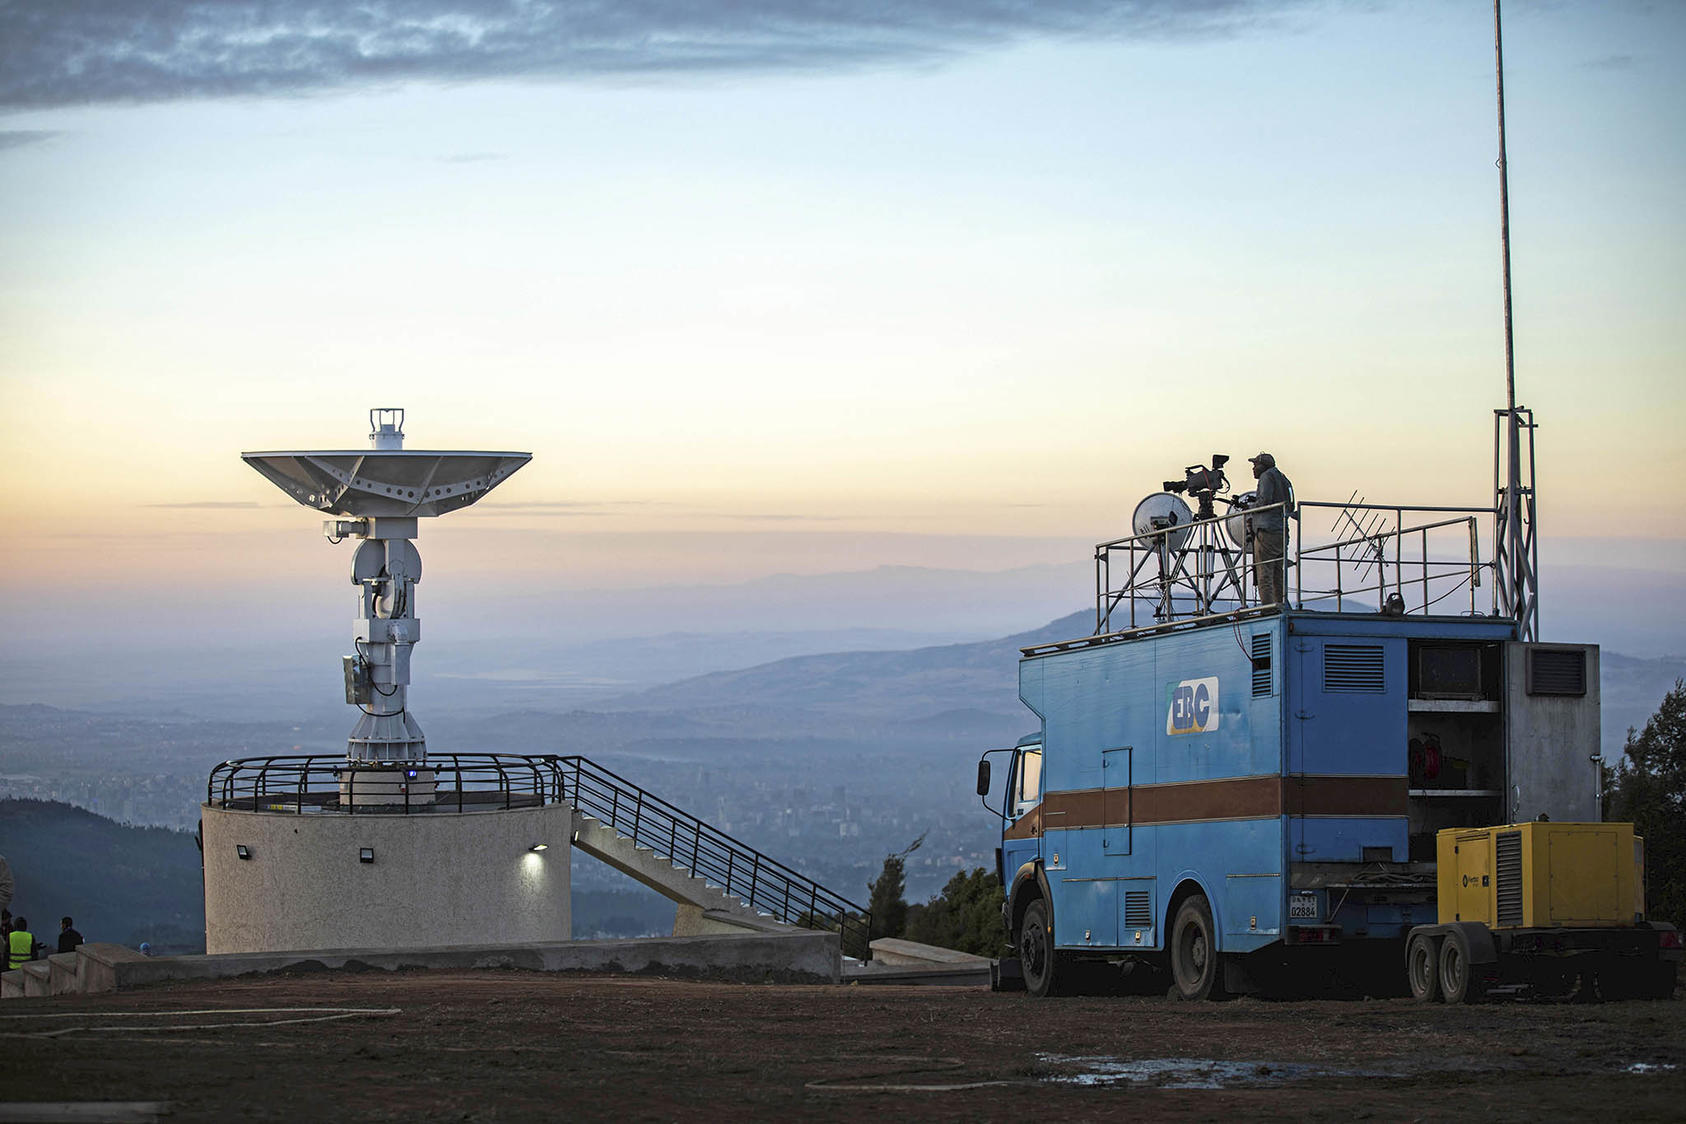 Ethiopia’s state-owned EBC broadcasts the launch of the nation’s first satellite, ETRSS-1, at the Entoto Observatory near Addis Ababa on December 20, 2019. (Photo by Mulugeta Ayene/AP)